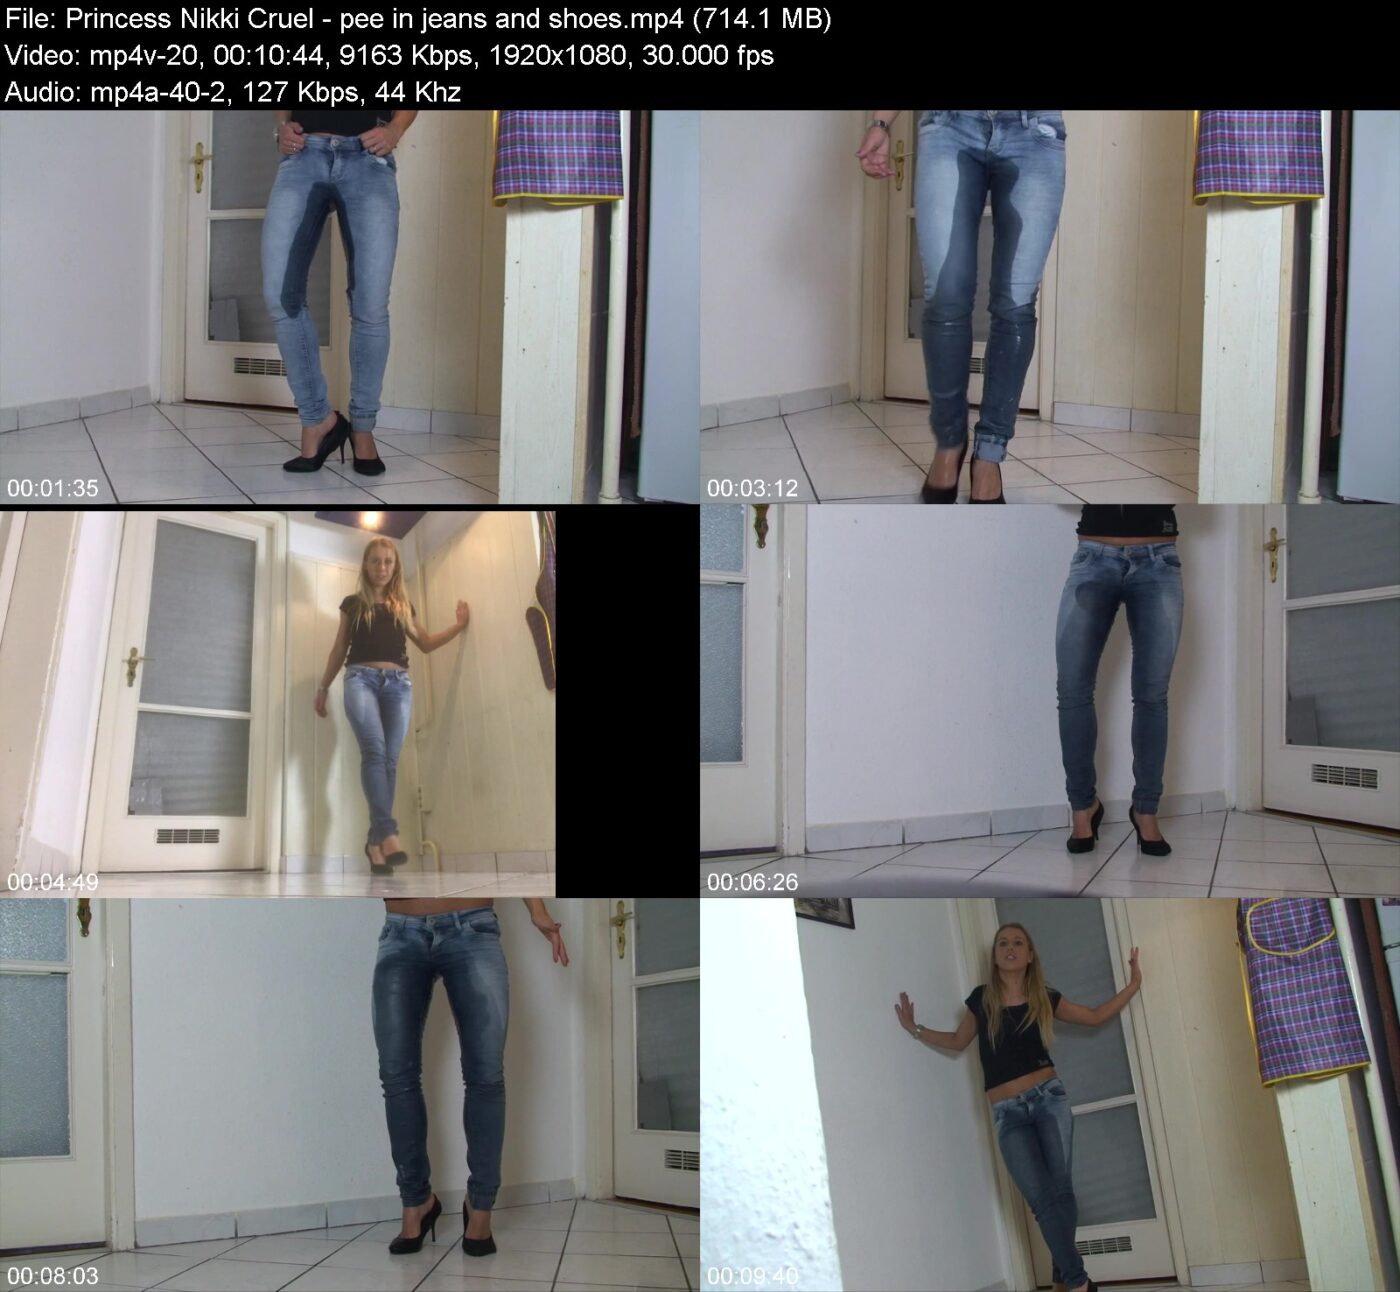 Princess Nikki Cruel - pee in jeans and shoes